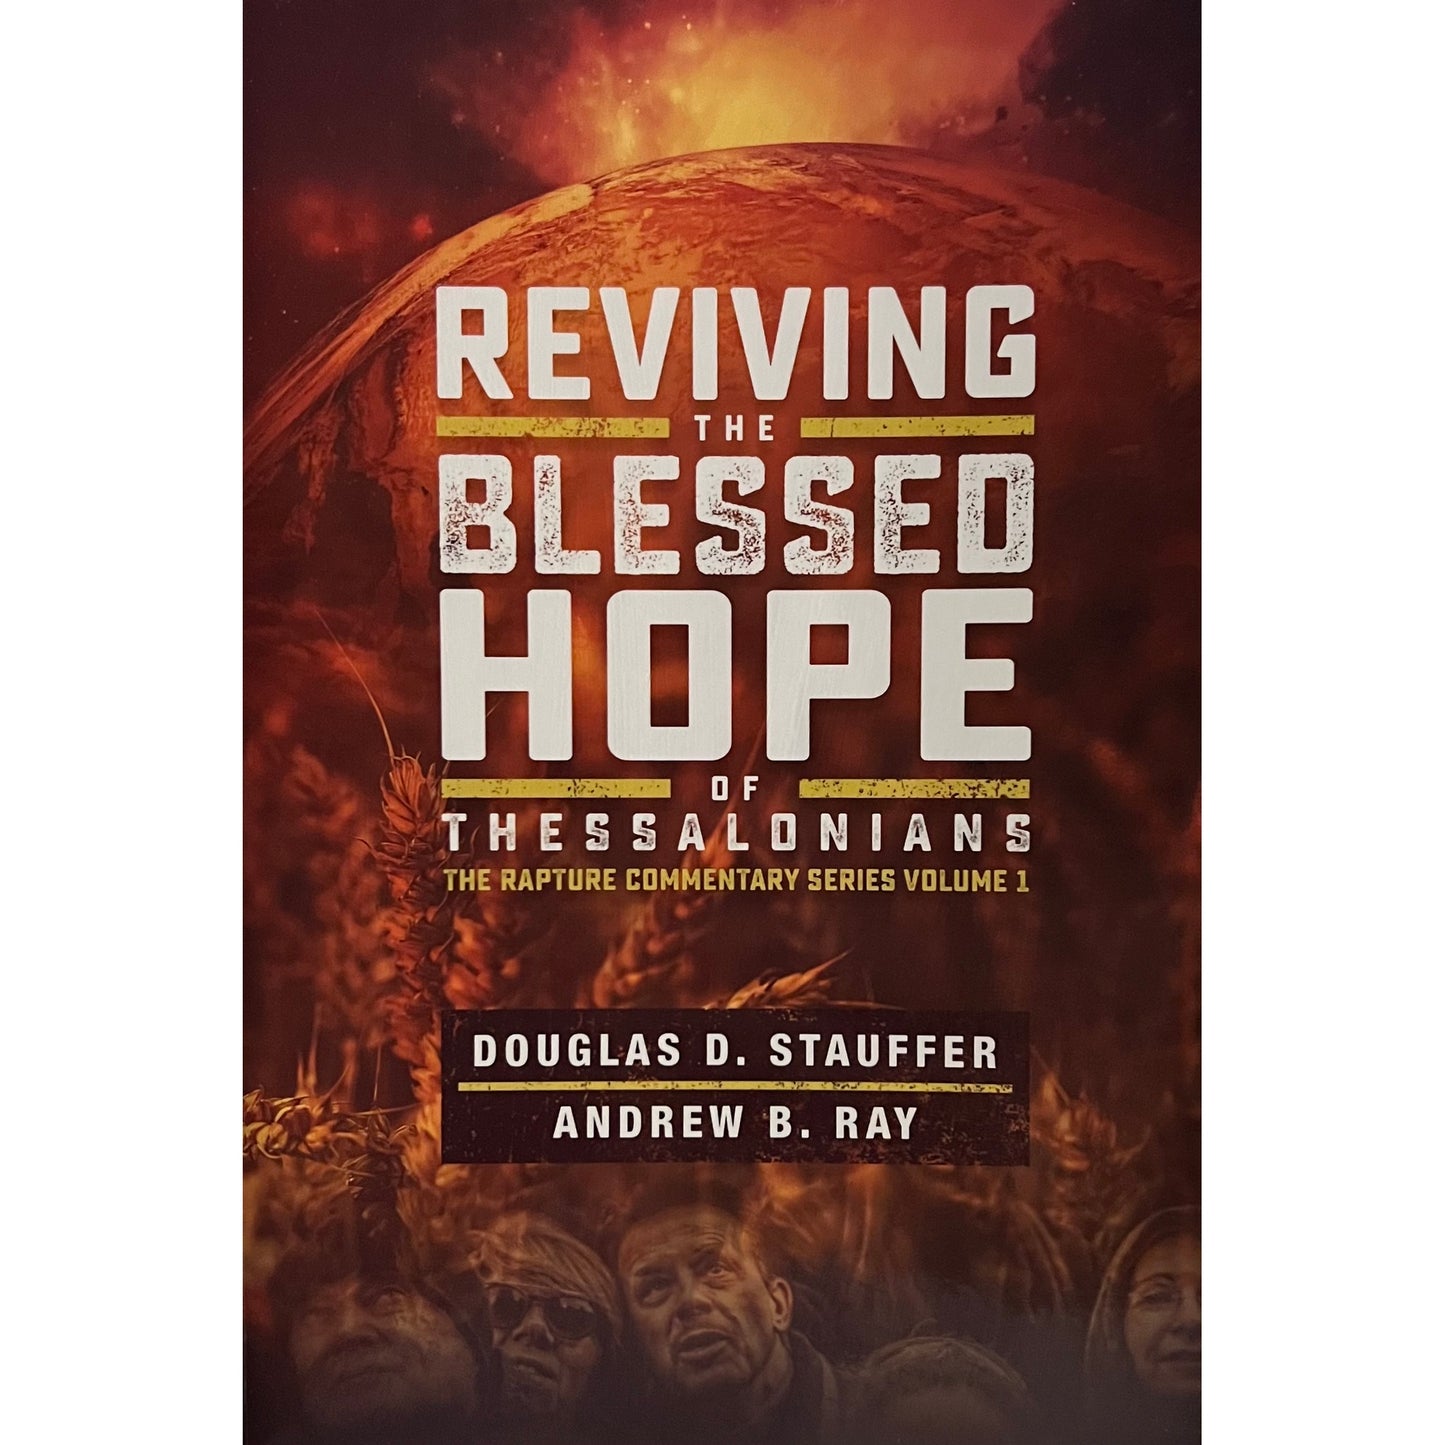 Reviving the Blessed Hope of Thessalonians: The Rapture Commentary Series Volume 1